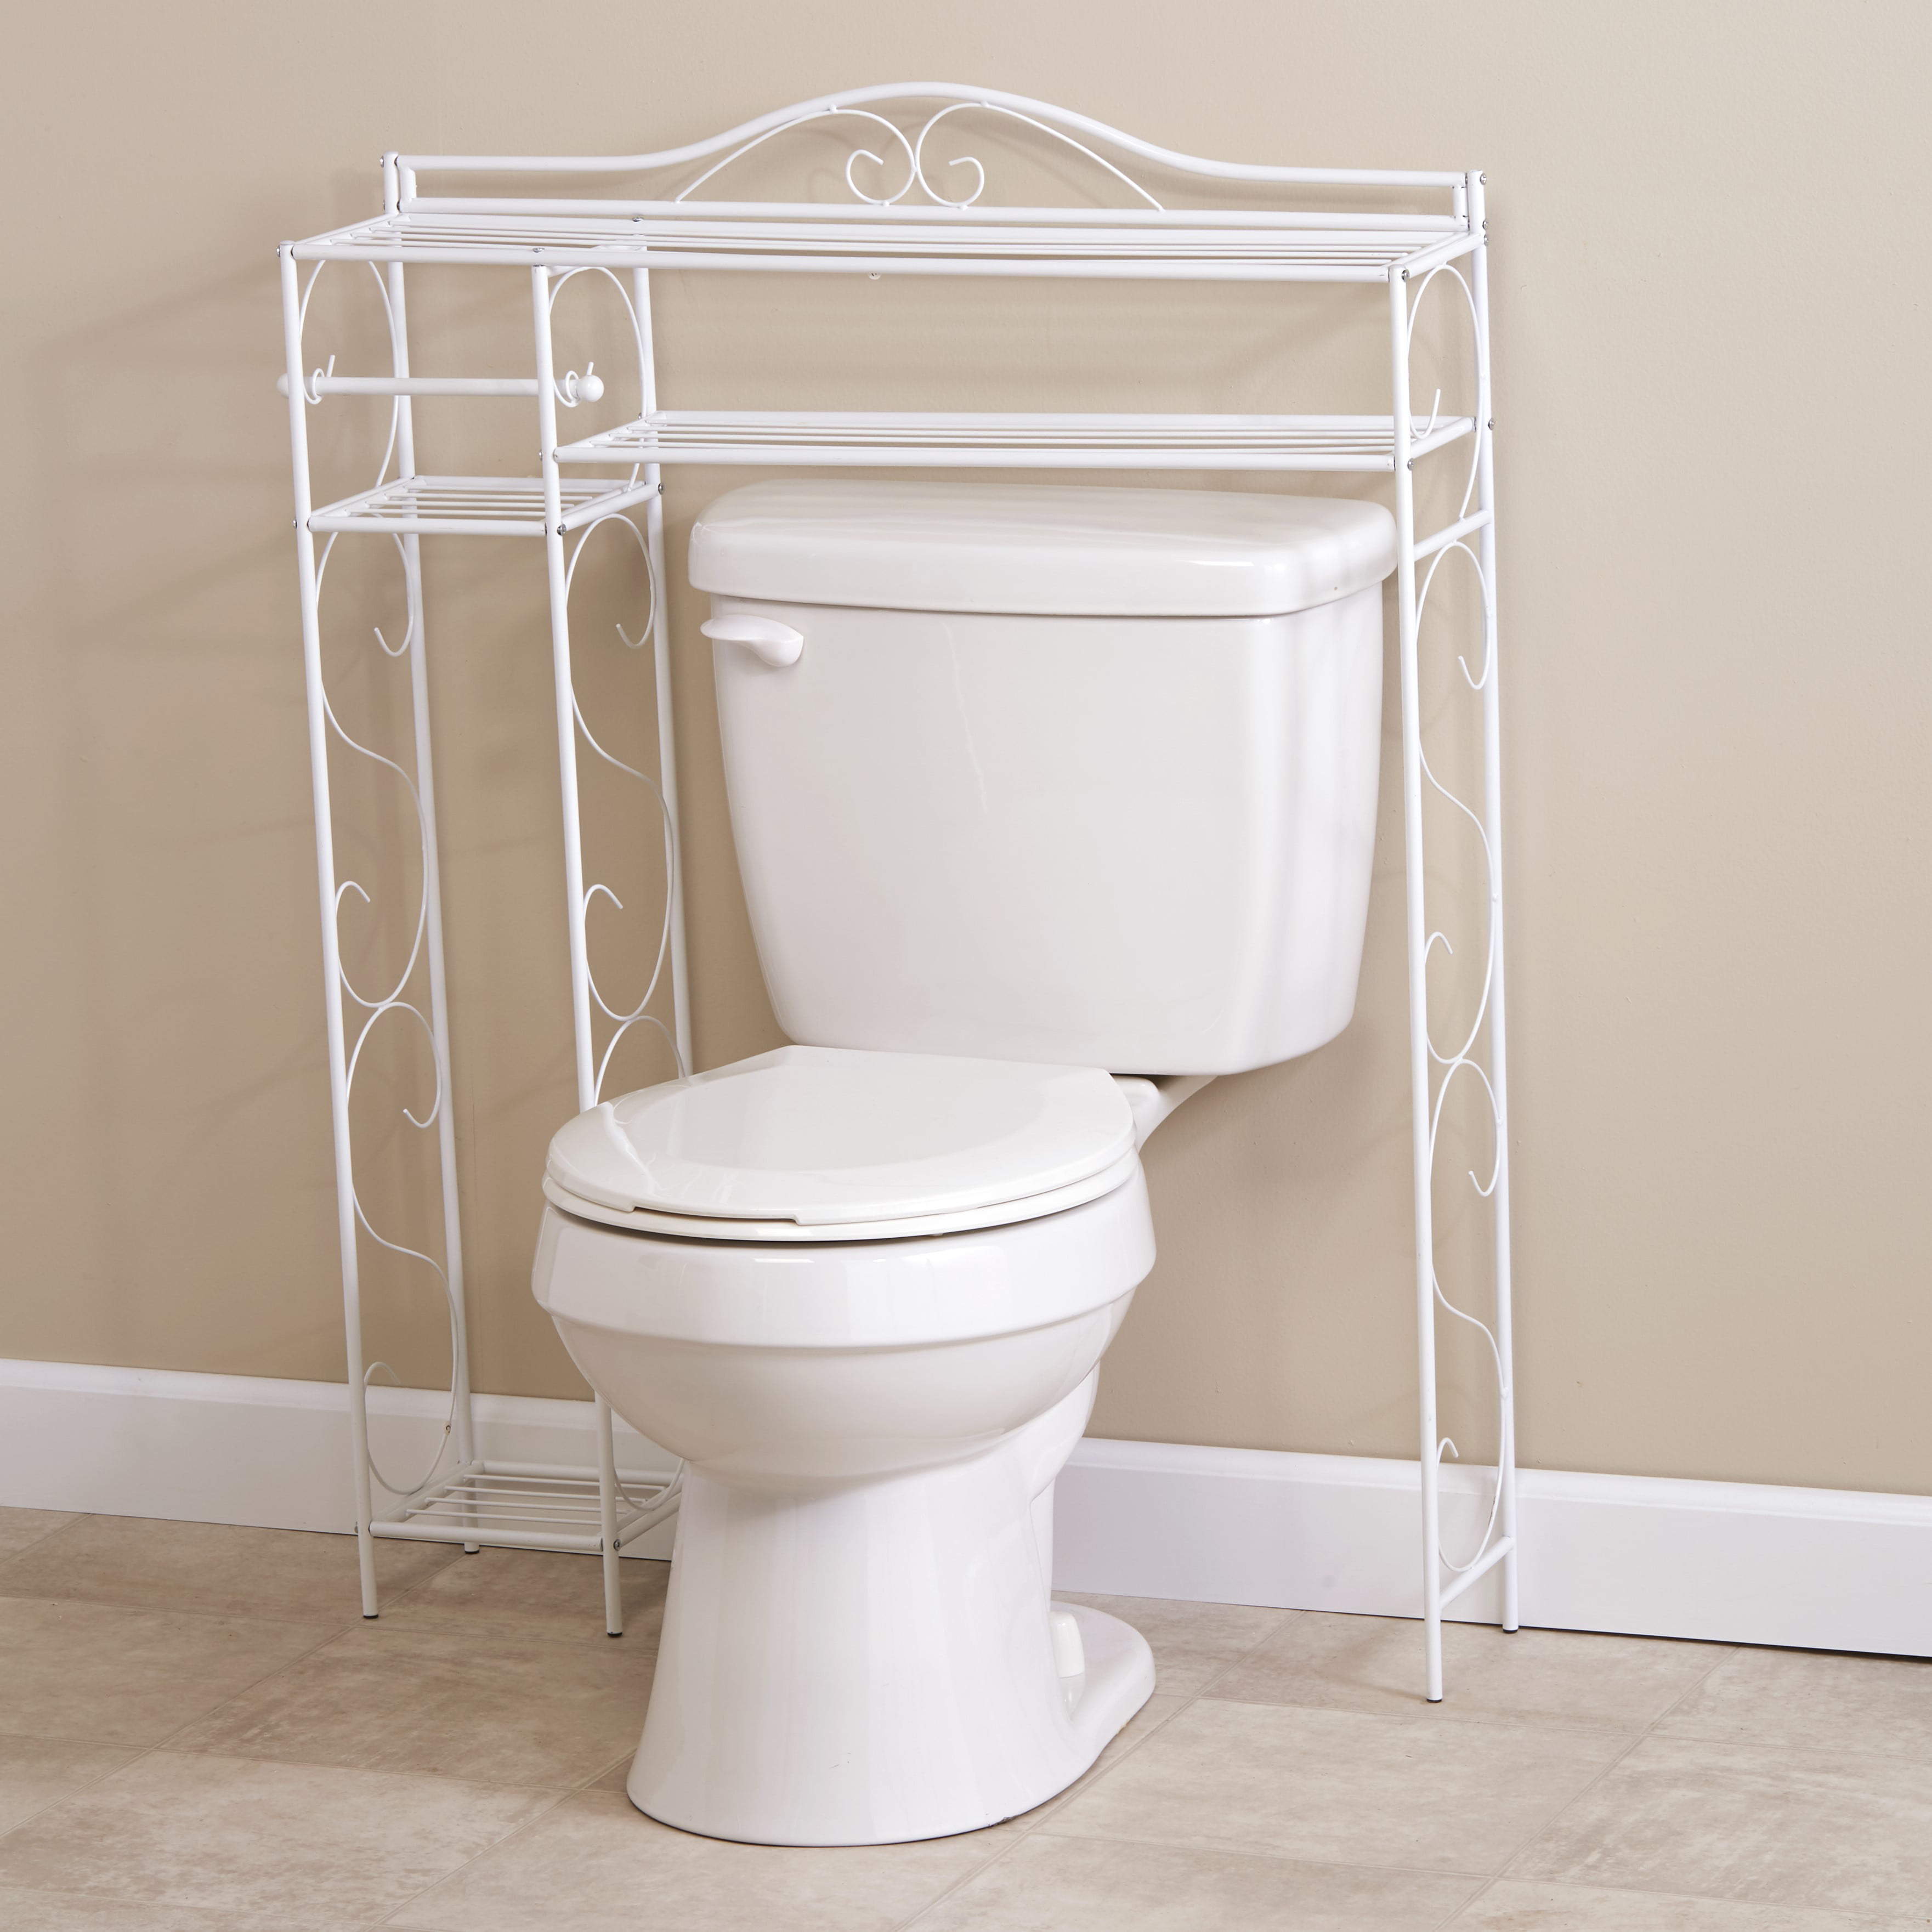 Space saving Over the toilet Storage Solutions